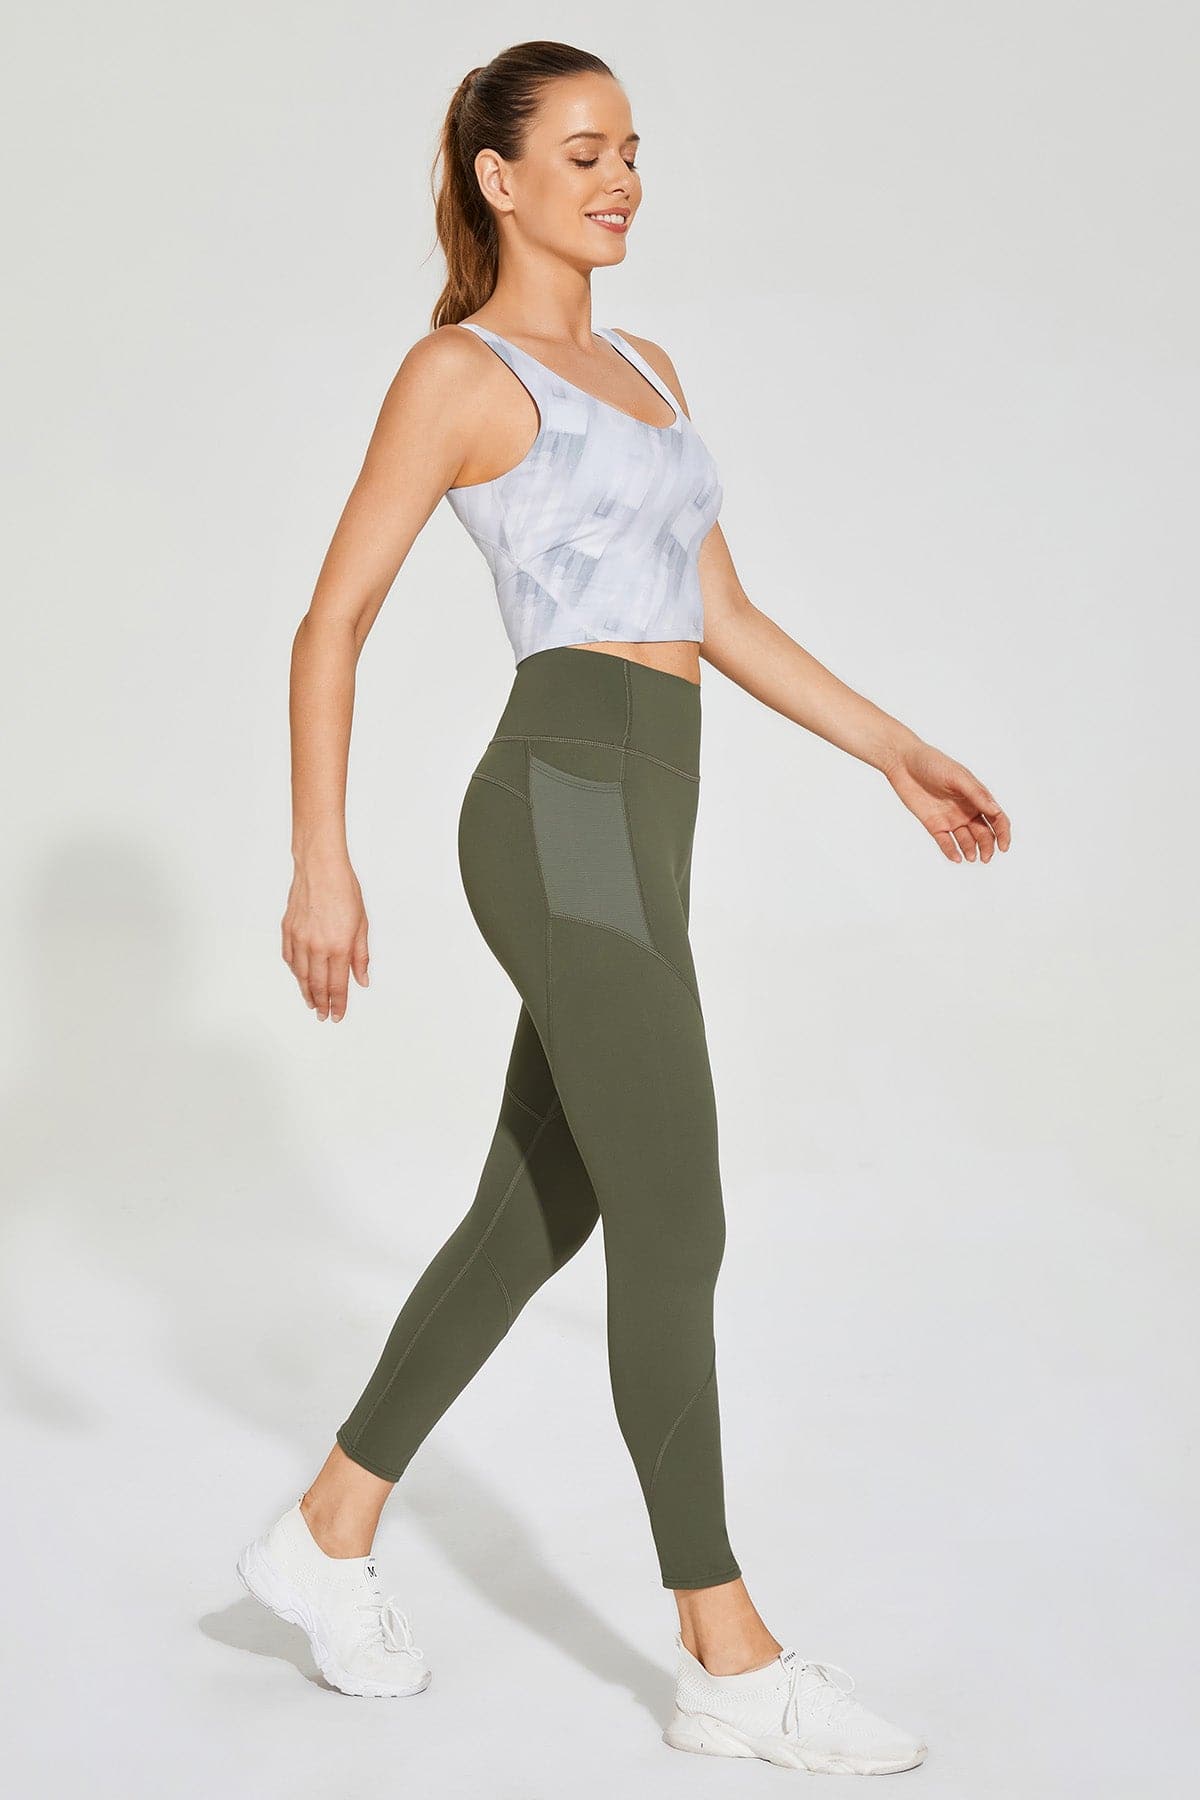 Pollypark ribbed yoga pants with pockets full length